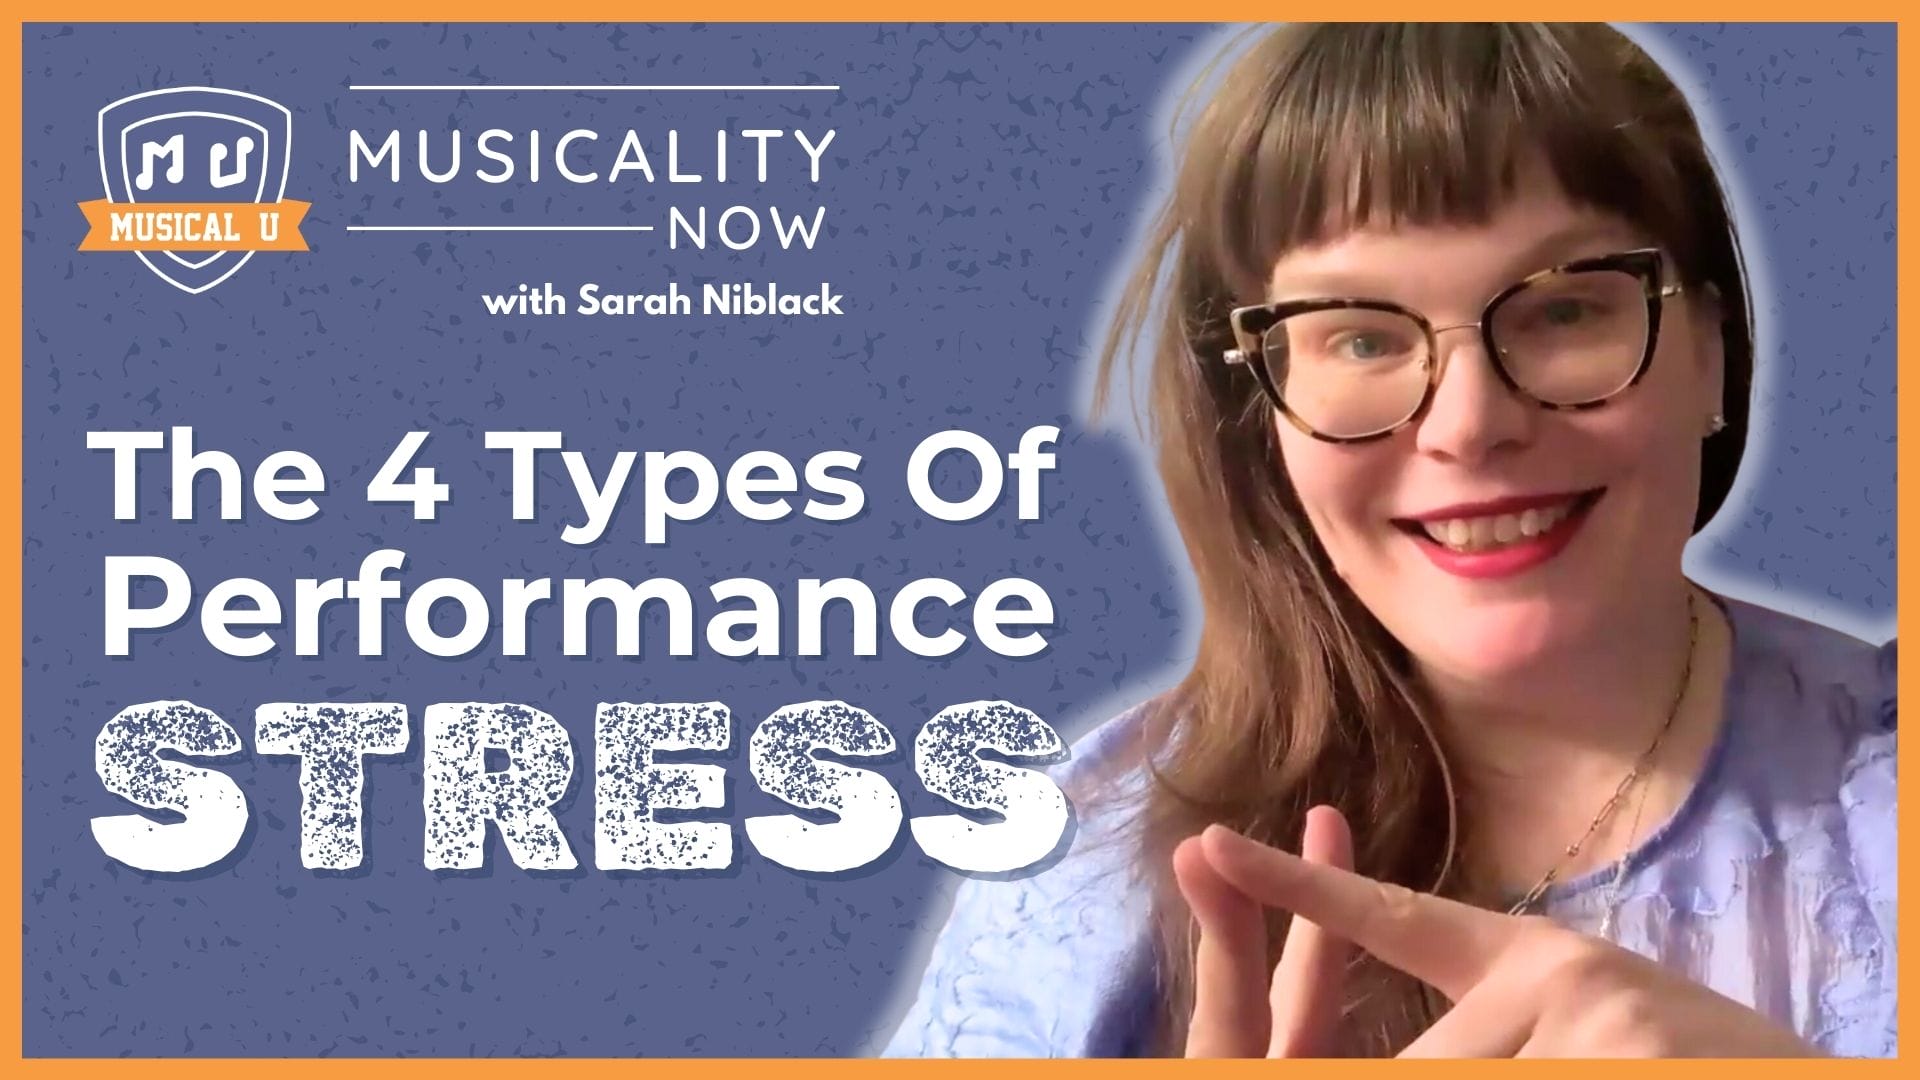 Overcoming The 4 Types Of Performance Stress, with Sarah Niblack